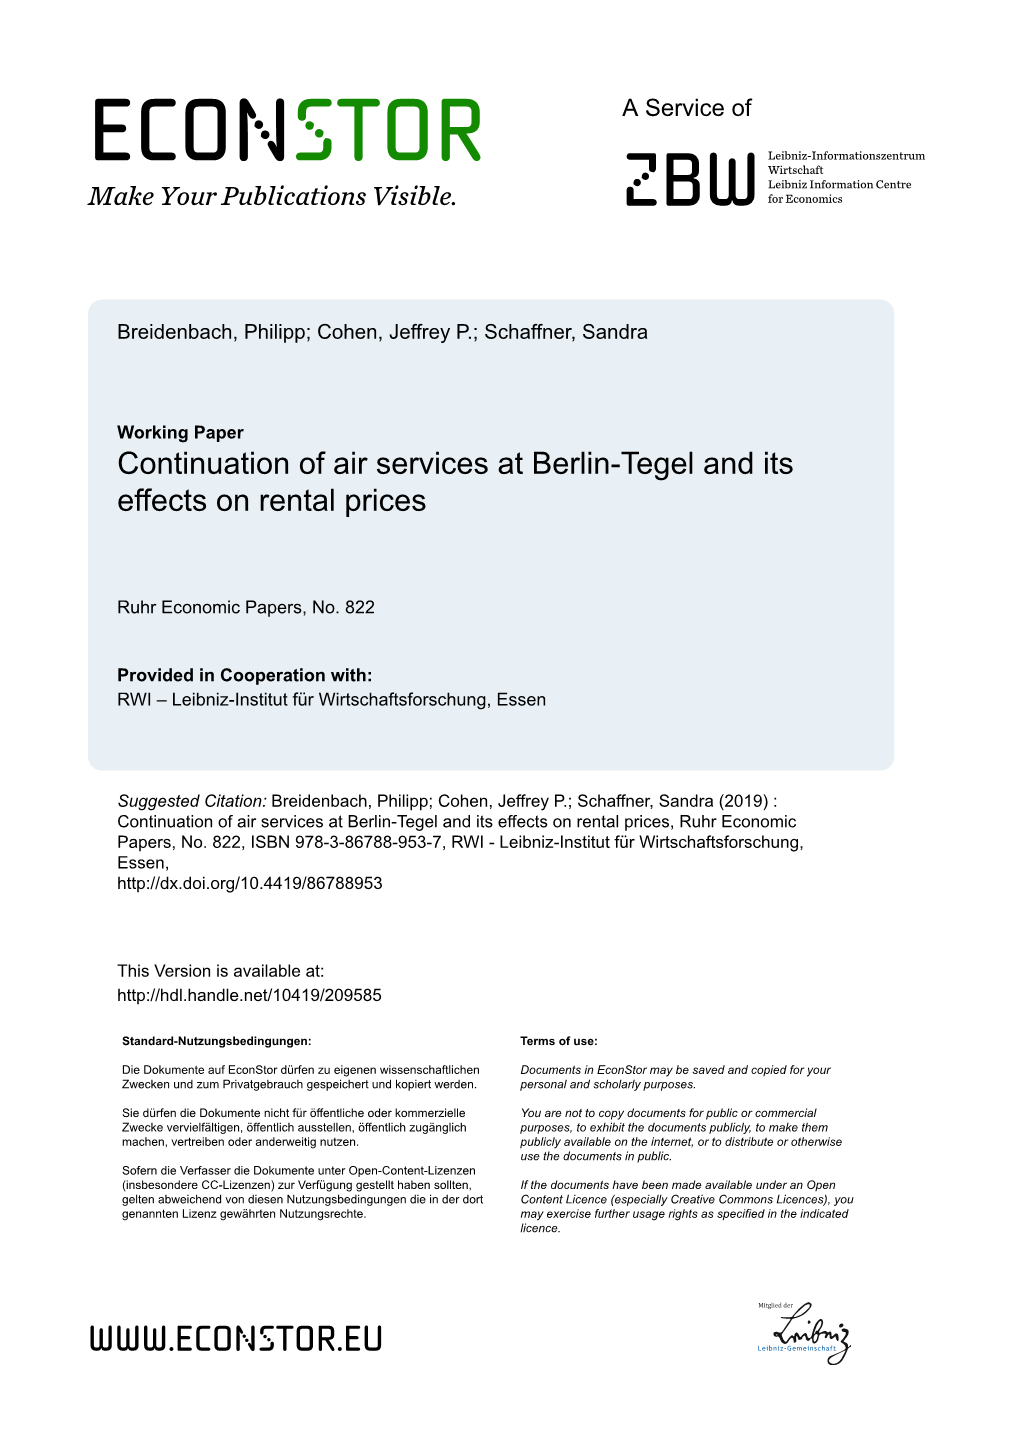 Continuation of Air Services at Berlin- Tegel and Its Effects on Rental Prices